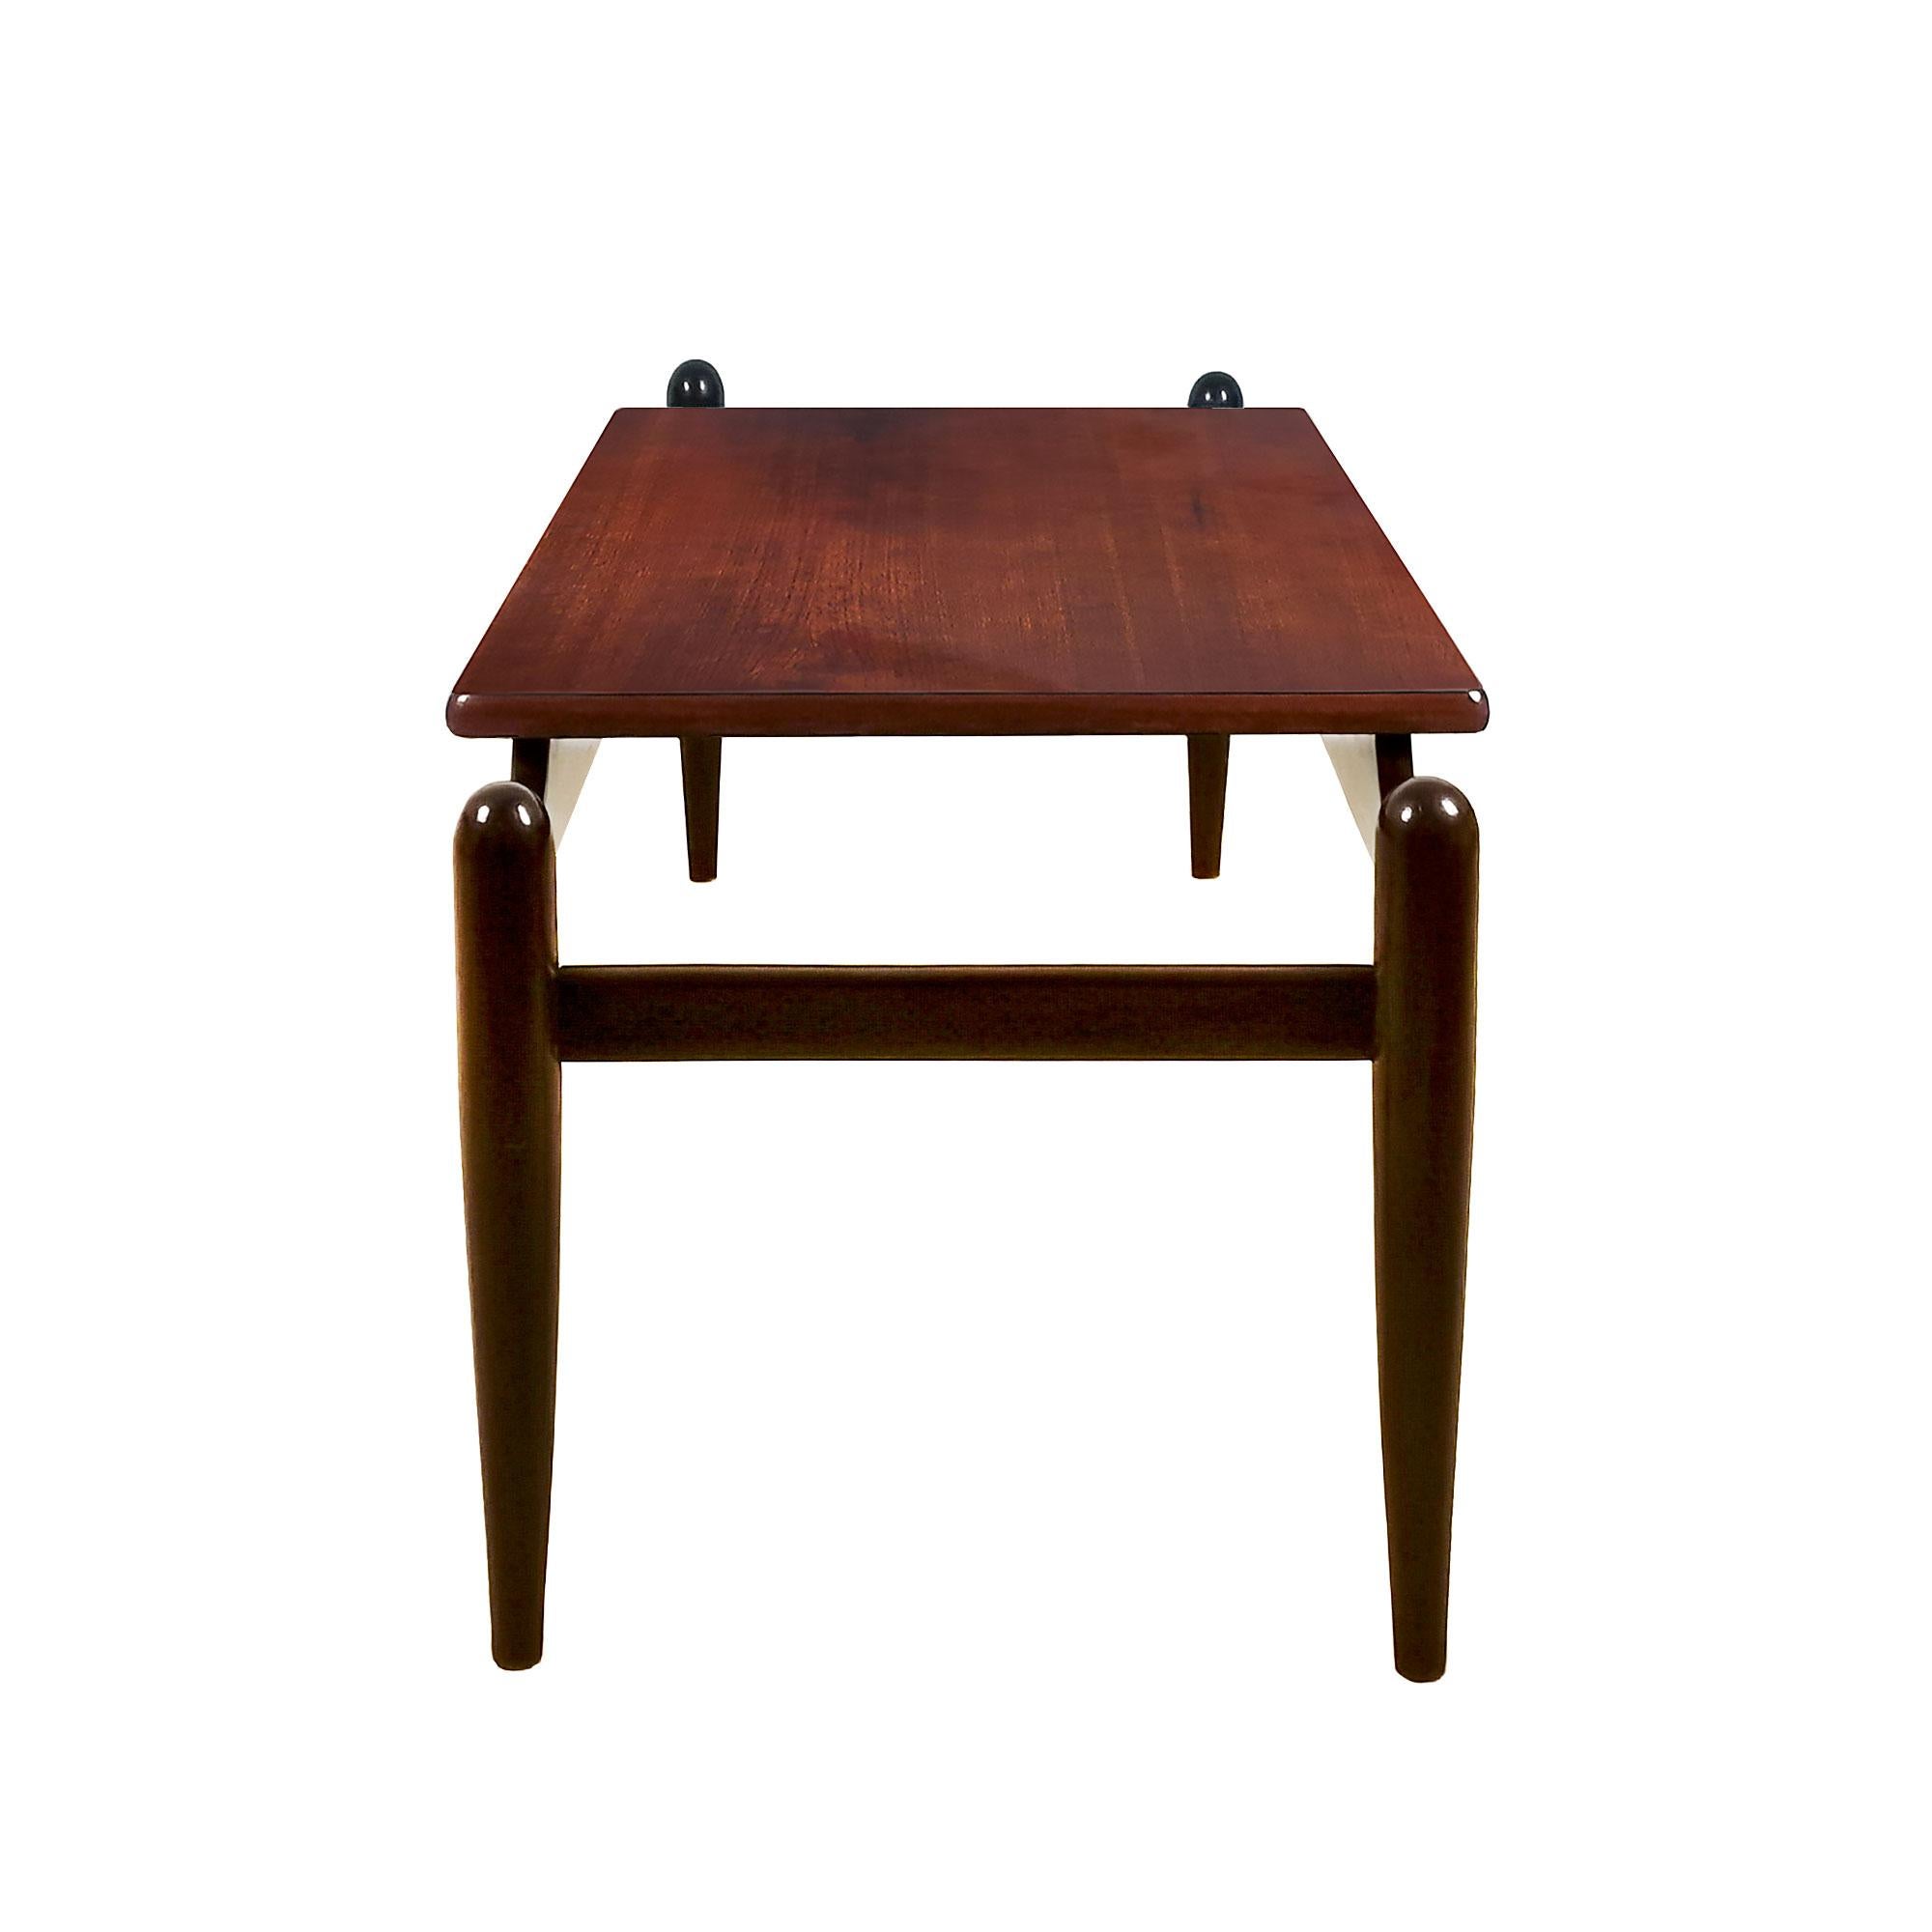 Italian Mid-Century Modern Coffee Table with Magazine Rack, Mahogany and Brass - Italy For Sale